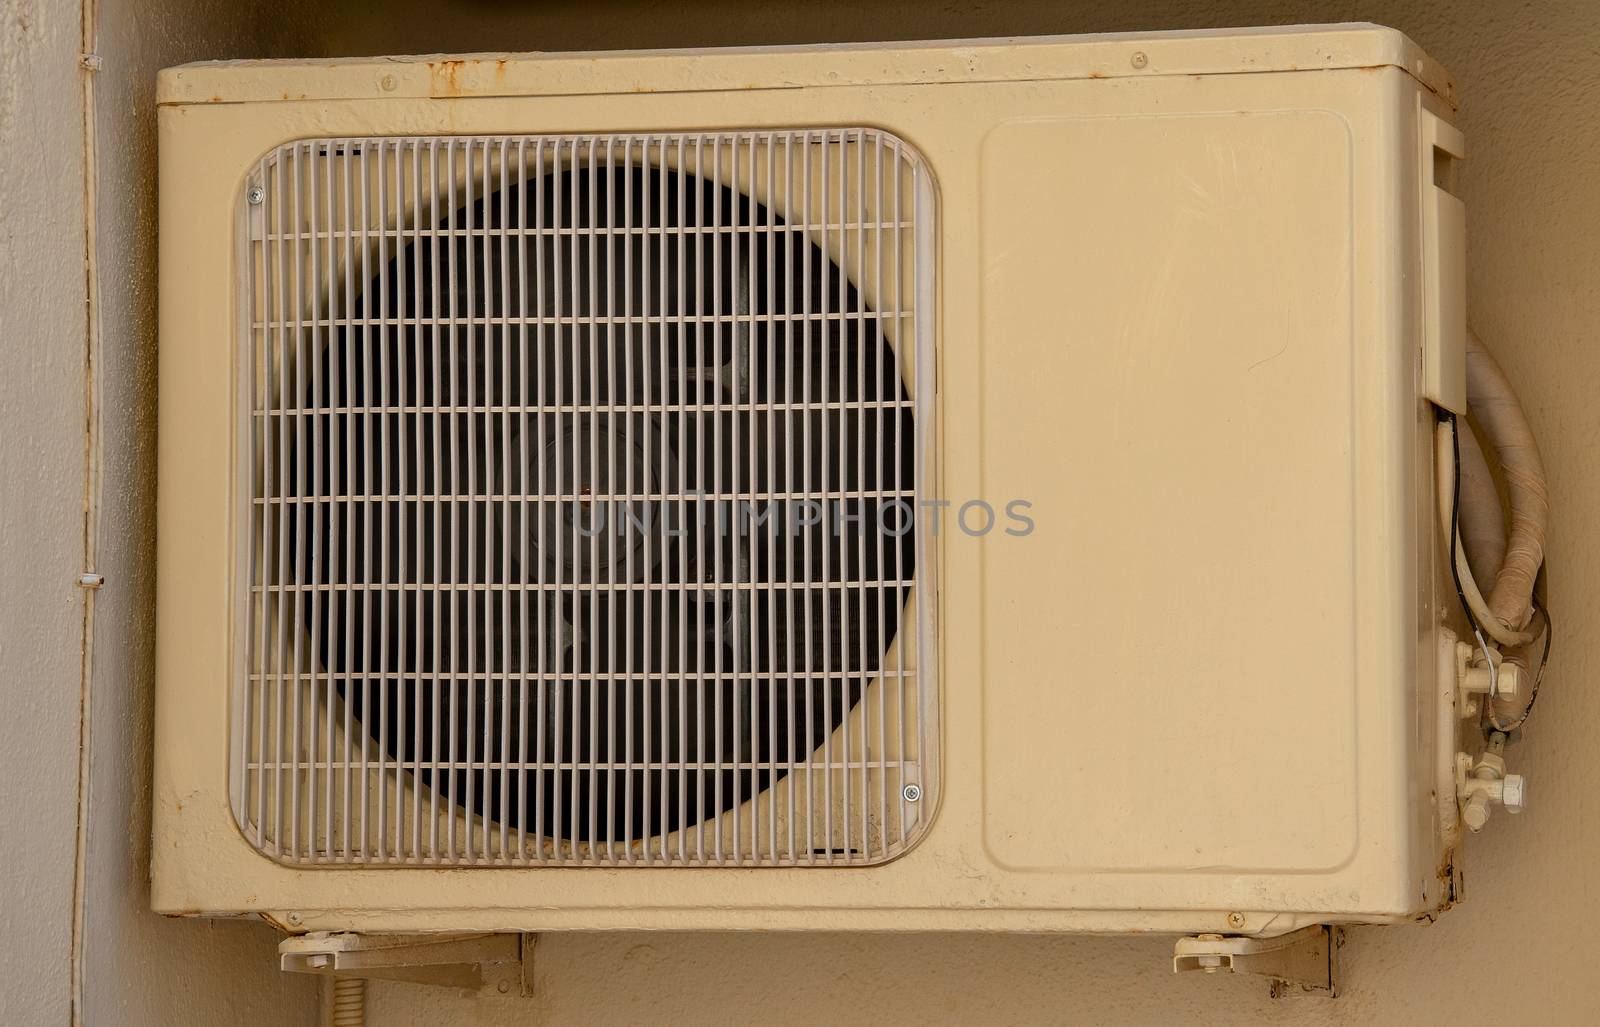 Air conditioner unit compressor outside a home. Condenser Fan for support residential cooling system. conditioning equipment machinery hanging on exterior wall.  climate technology attached outdoor.